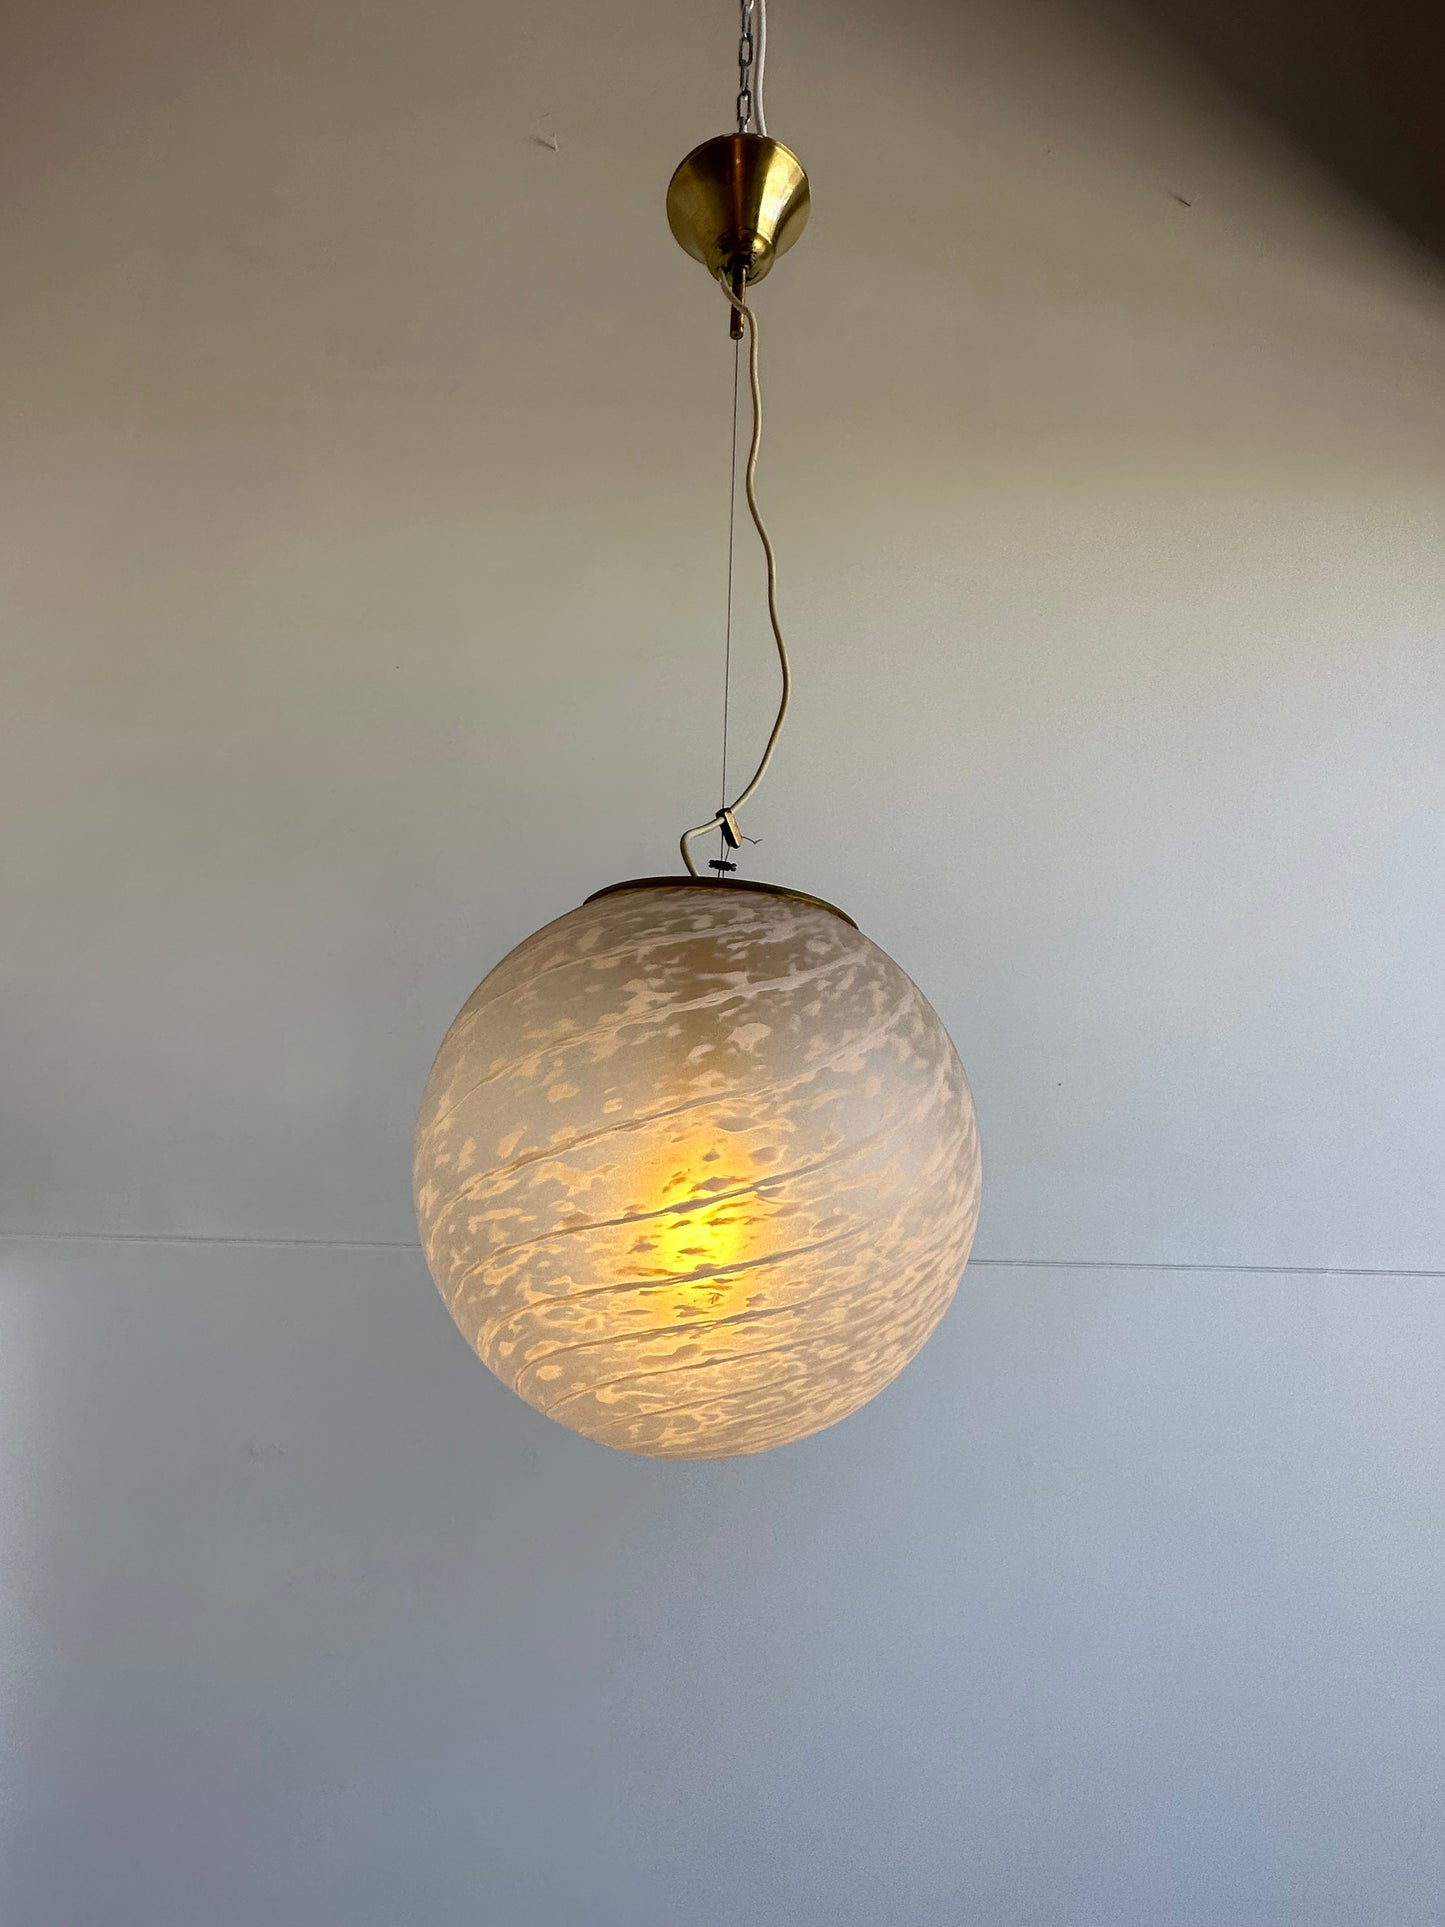 Paolo Venini Spherical Murano Glass with White Stripes & Brass Pendant Light, 1960s